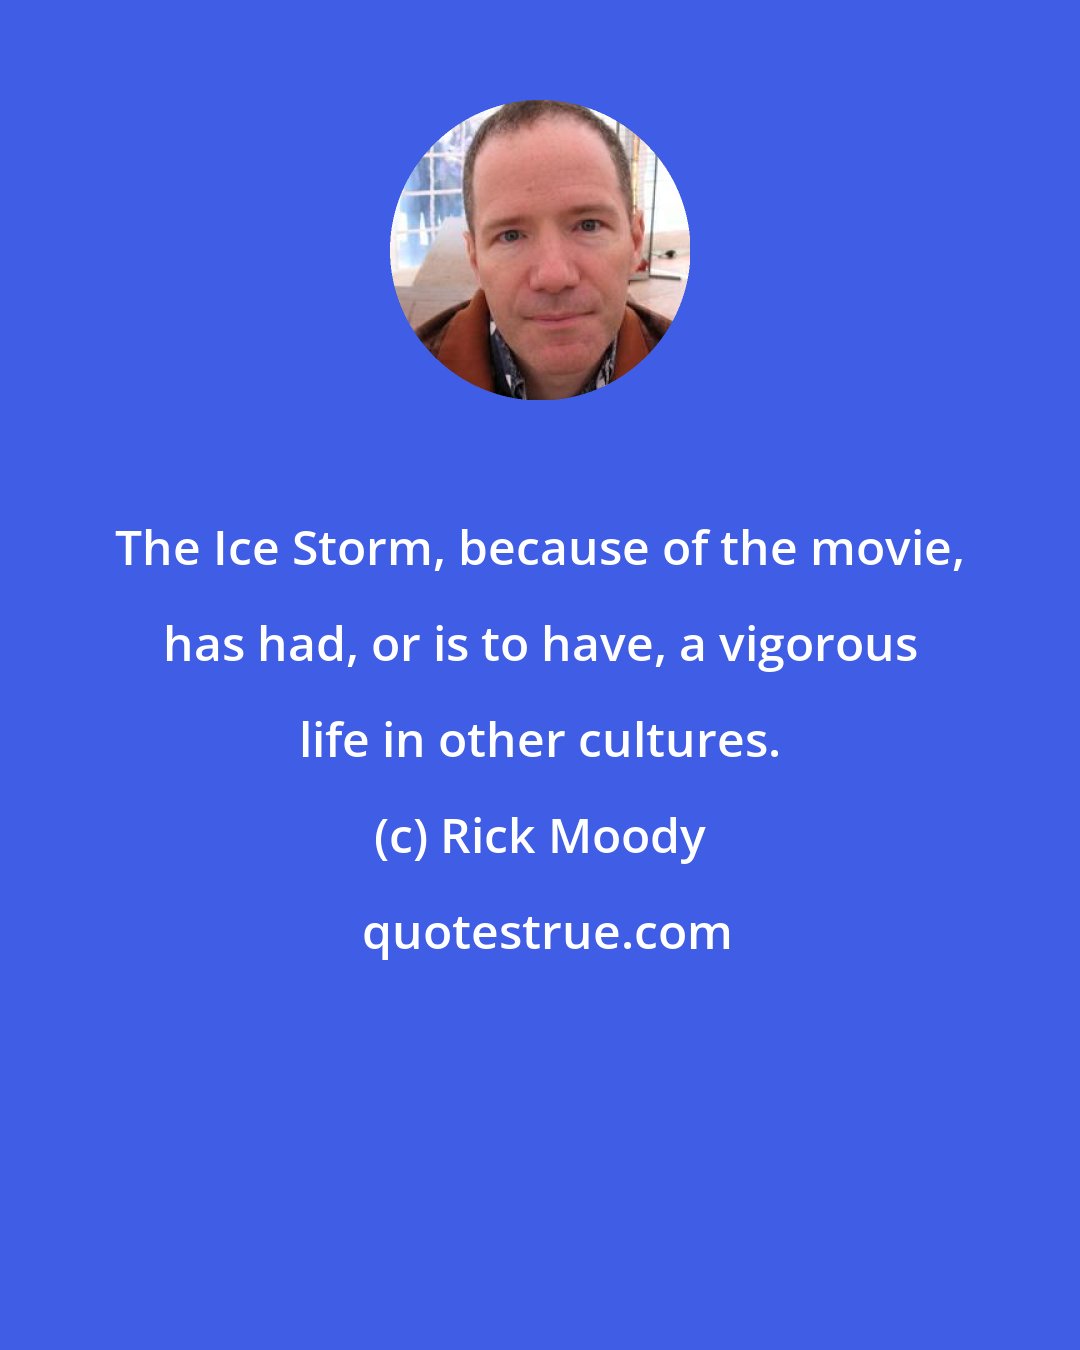 Rick Moody: The Ice Storm, because of the movie, has had, or is to have, a vigorous life in other cultures.